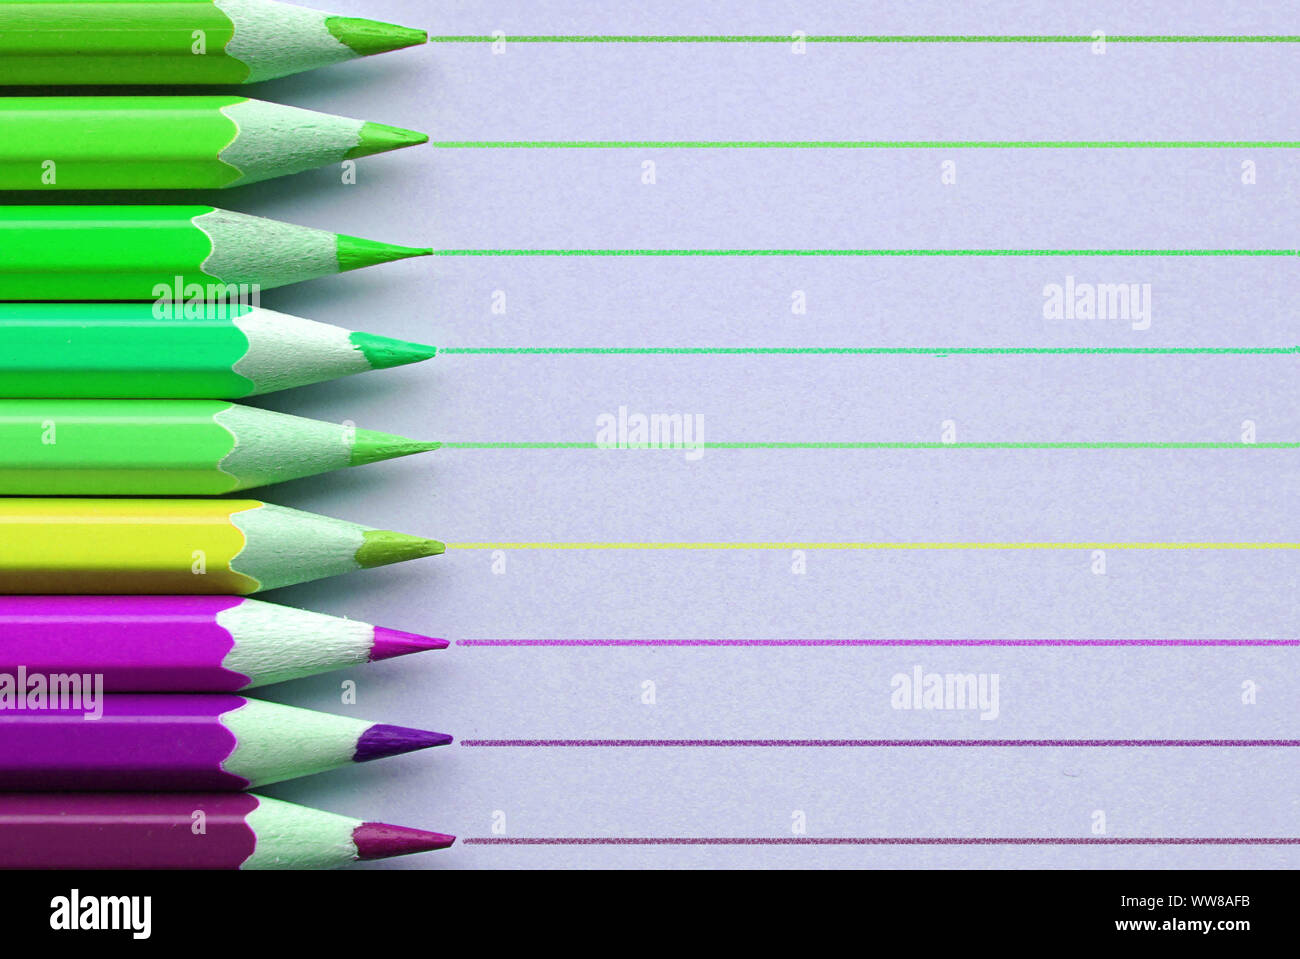 Bright and sharp colorful pencils on background with straight lines. Stock Photo